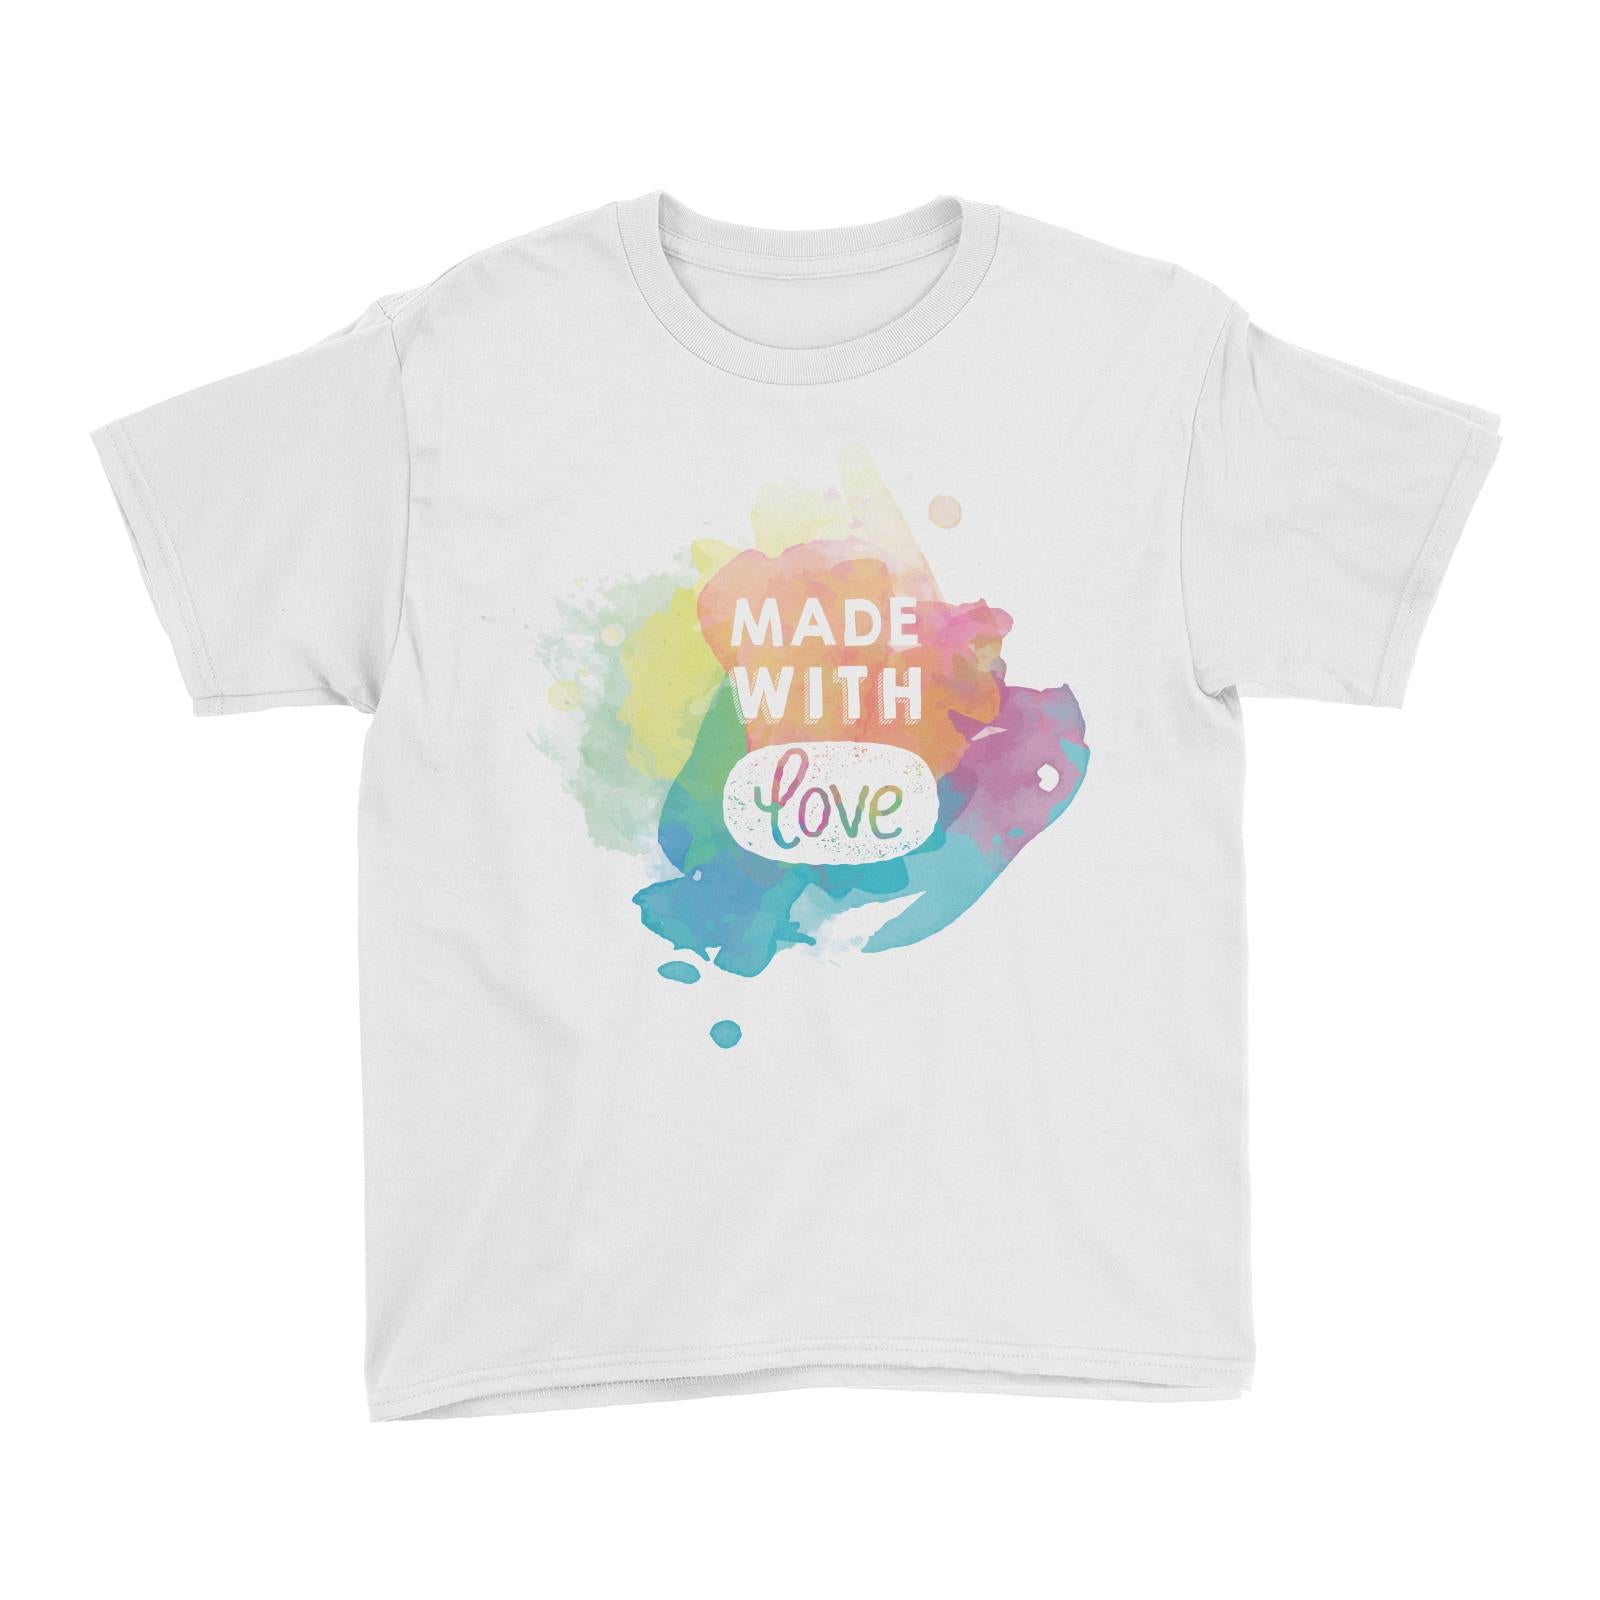 Made With Love White Kid's T-Shirt